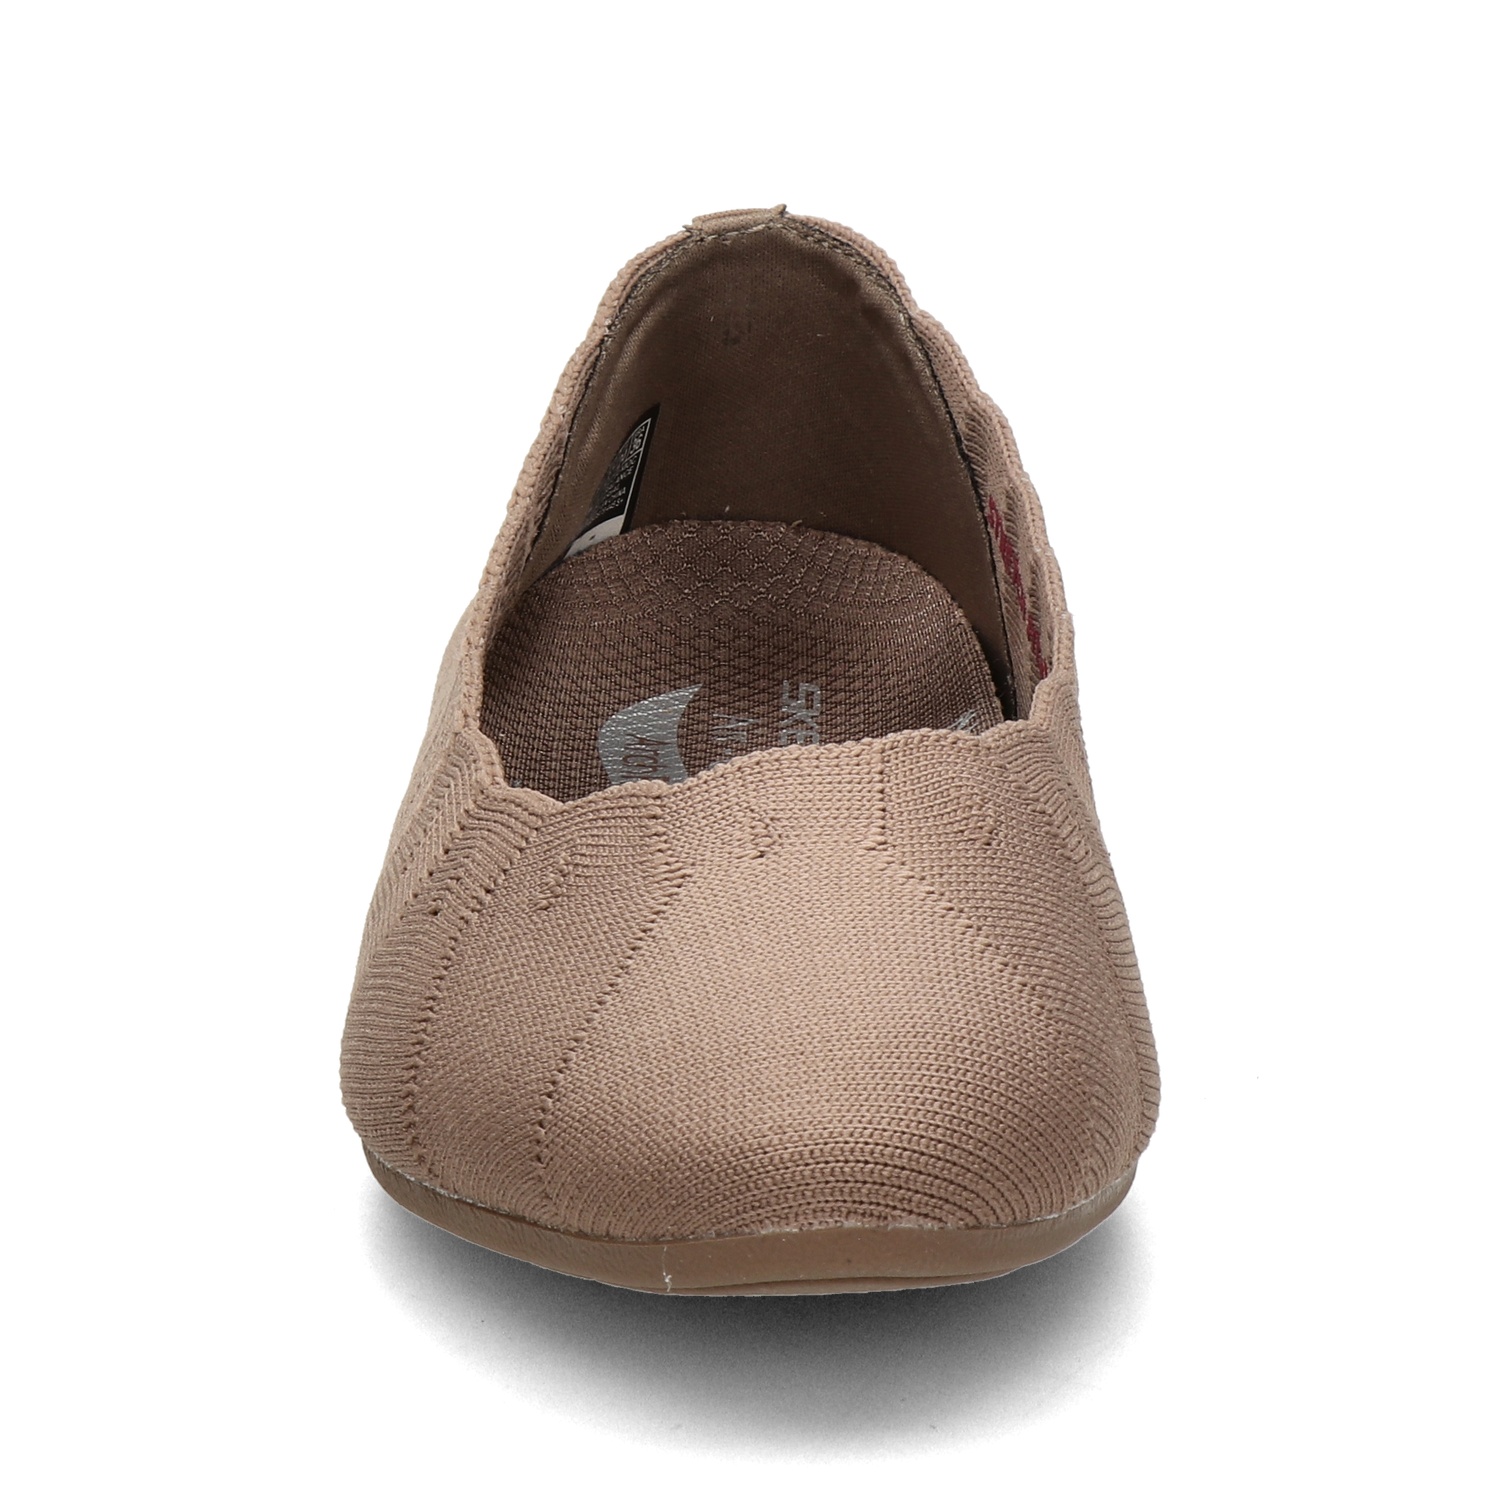 Skechers Cleo Arch Fit Slip On Shoes | StyleSearch